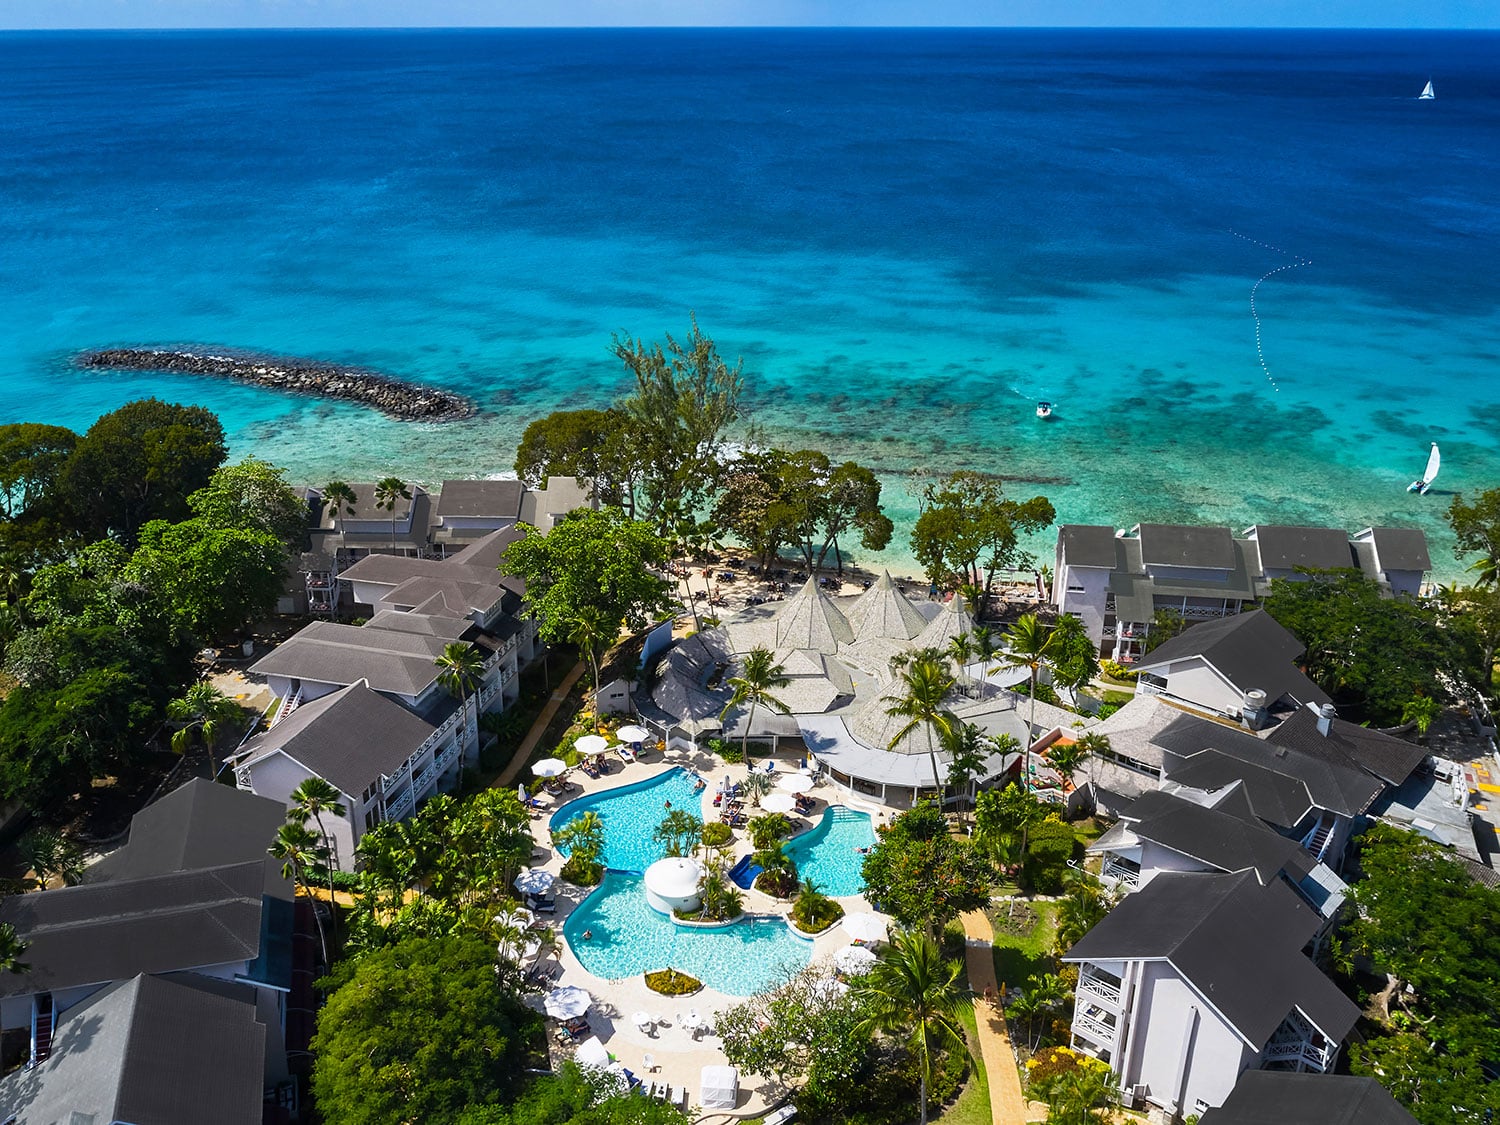 An aerial view of The Club in Barbados, part of Elite Islands Resorts.